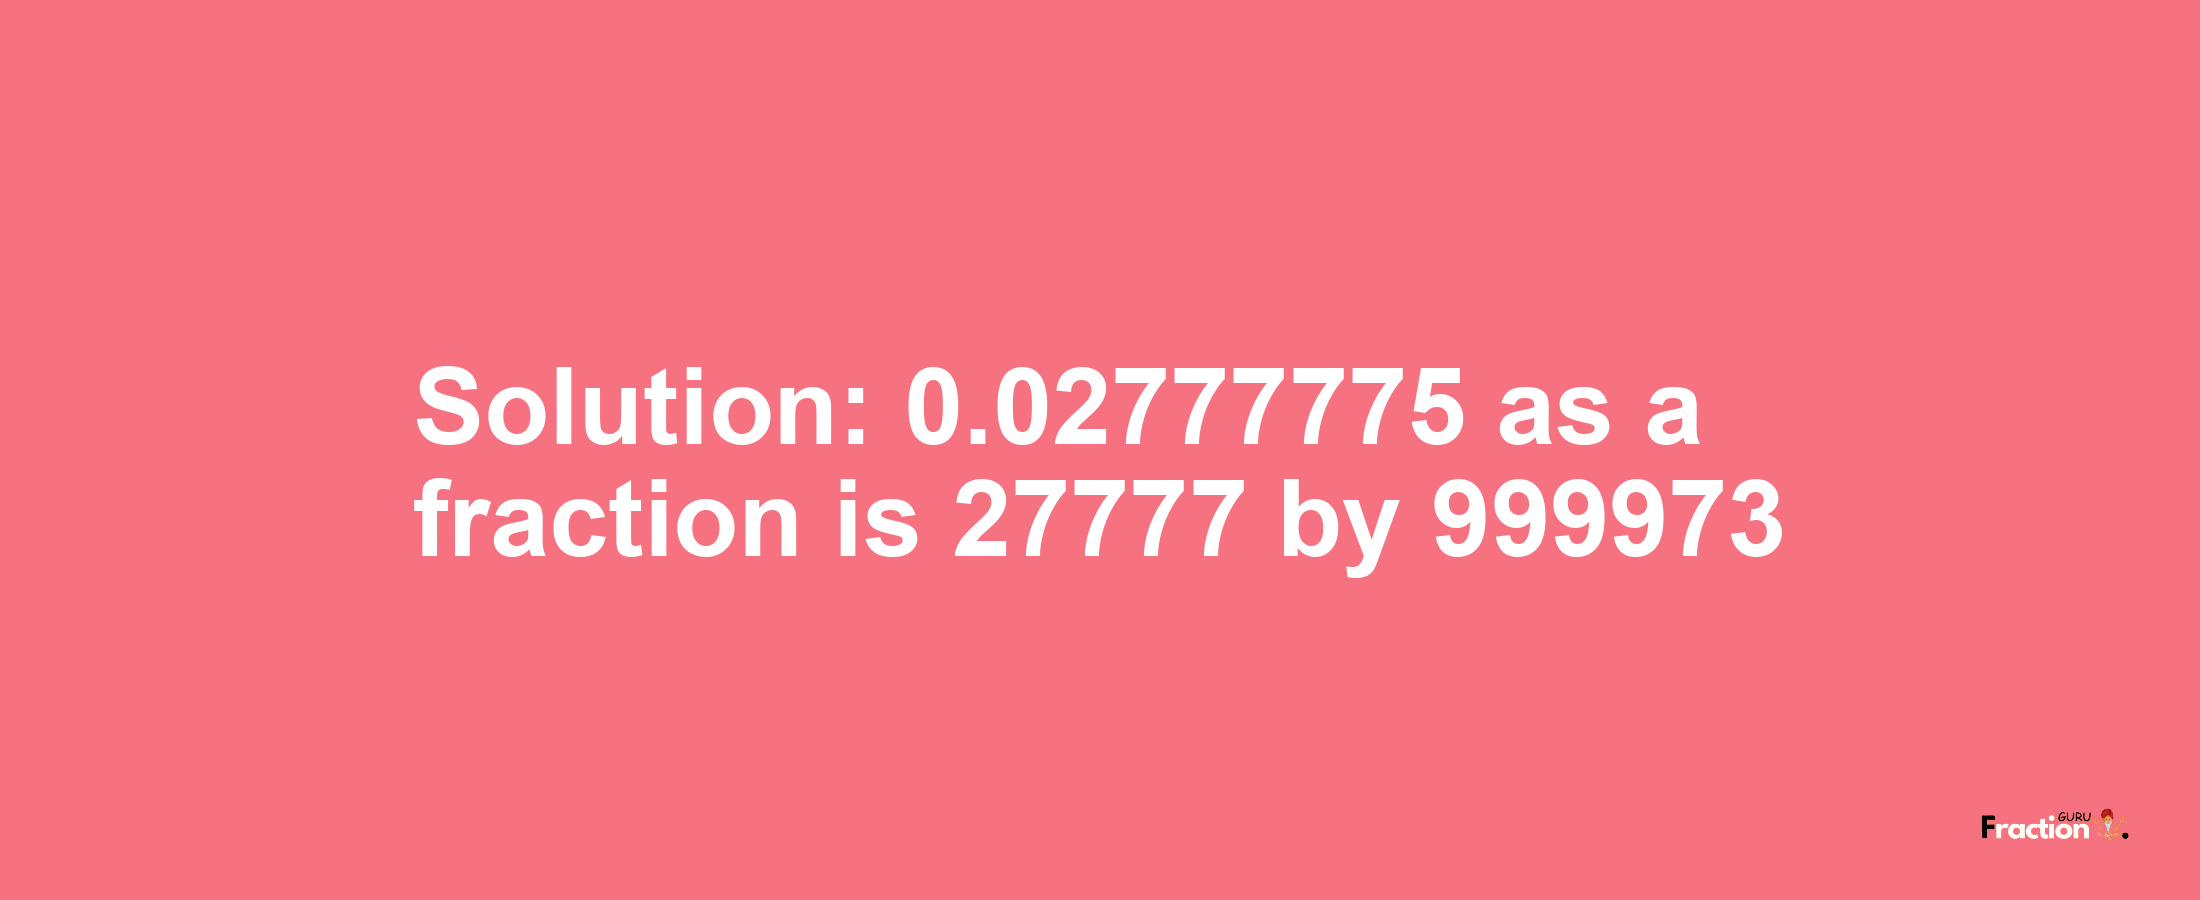 Solution:0.02777775 as a fraction is 27777/999973